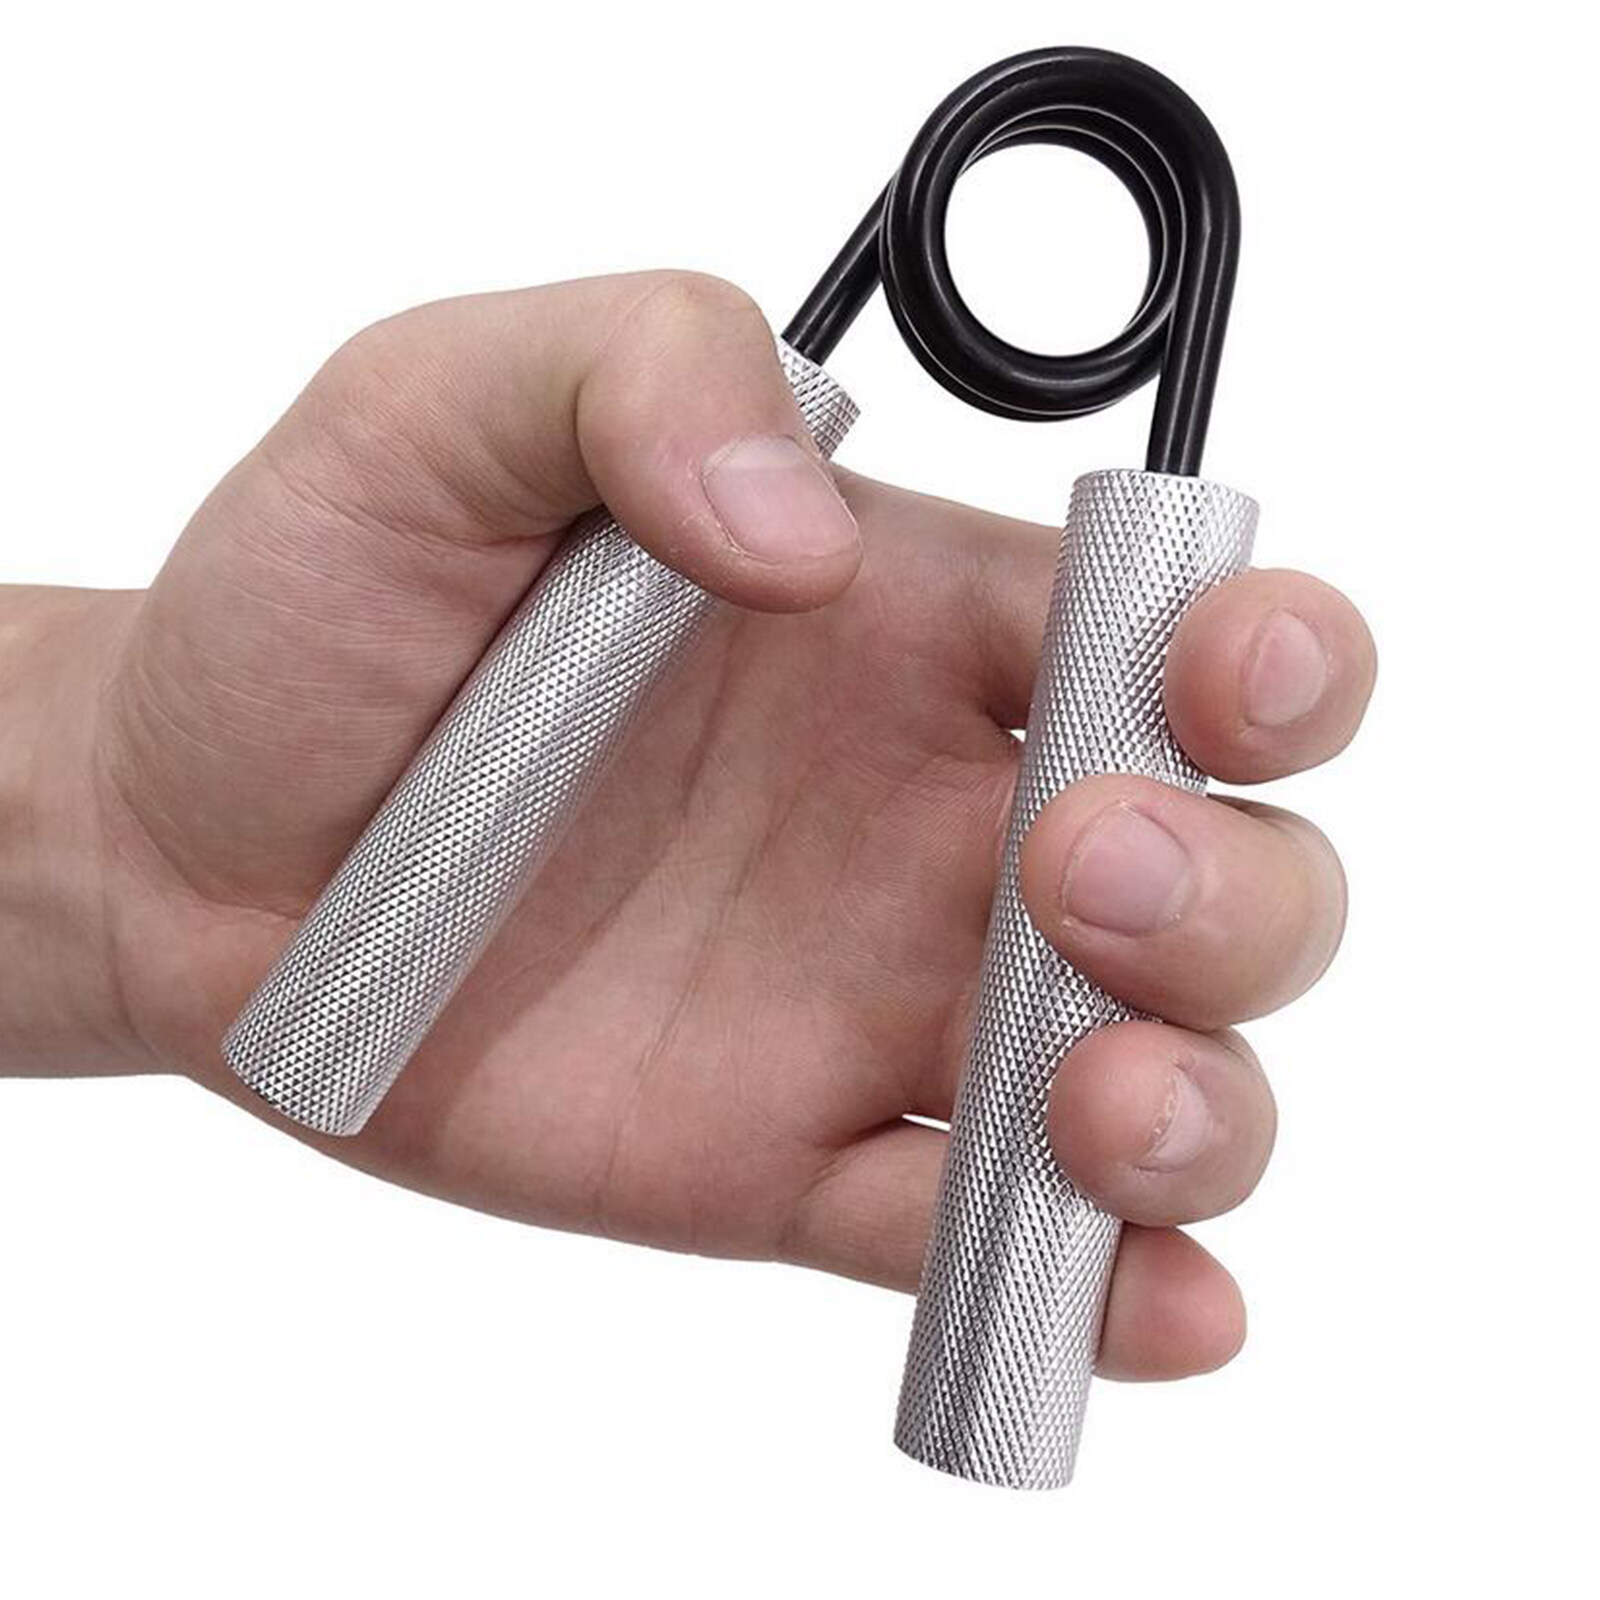 Baoblaze Heavy Grips - Hand Grippers for Beginners to Professionals - 100